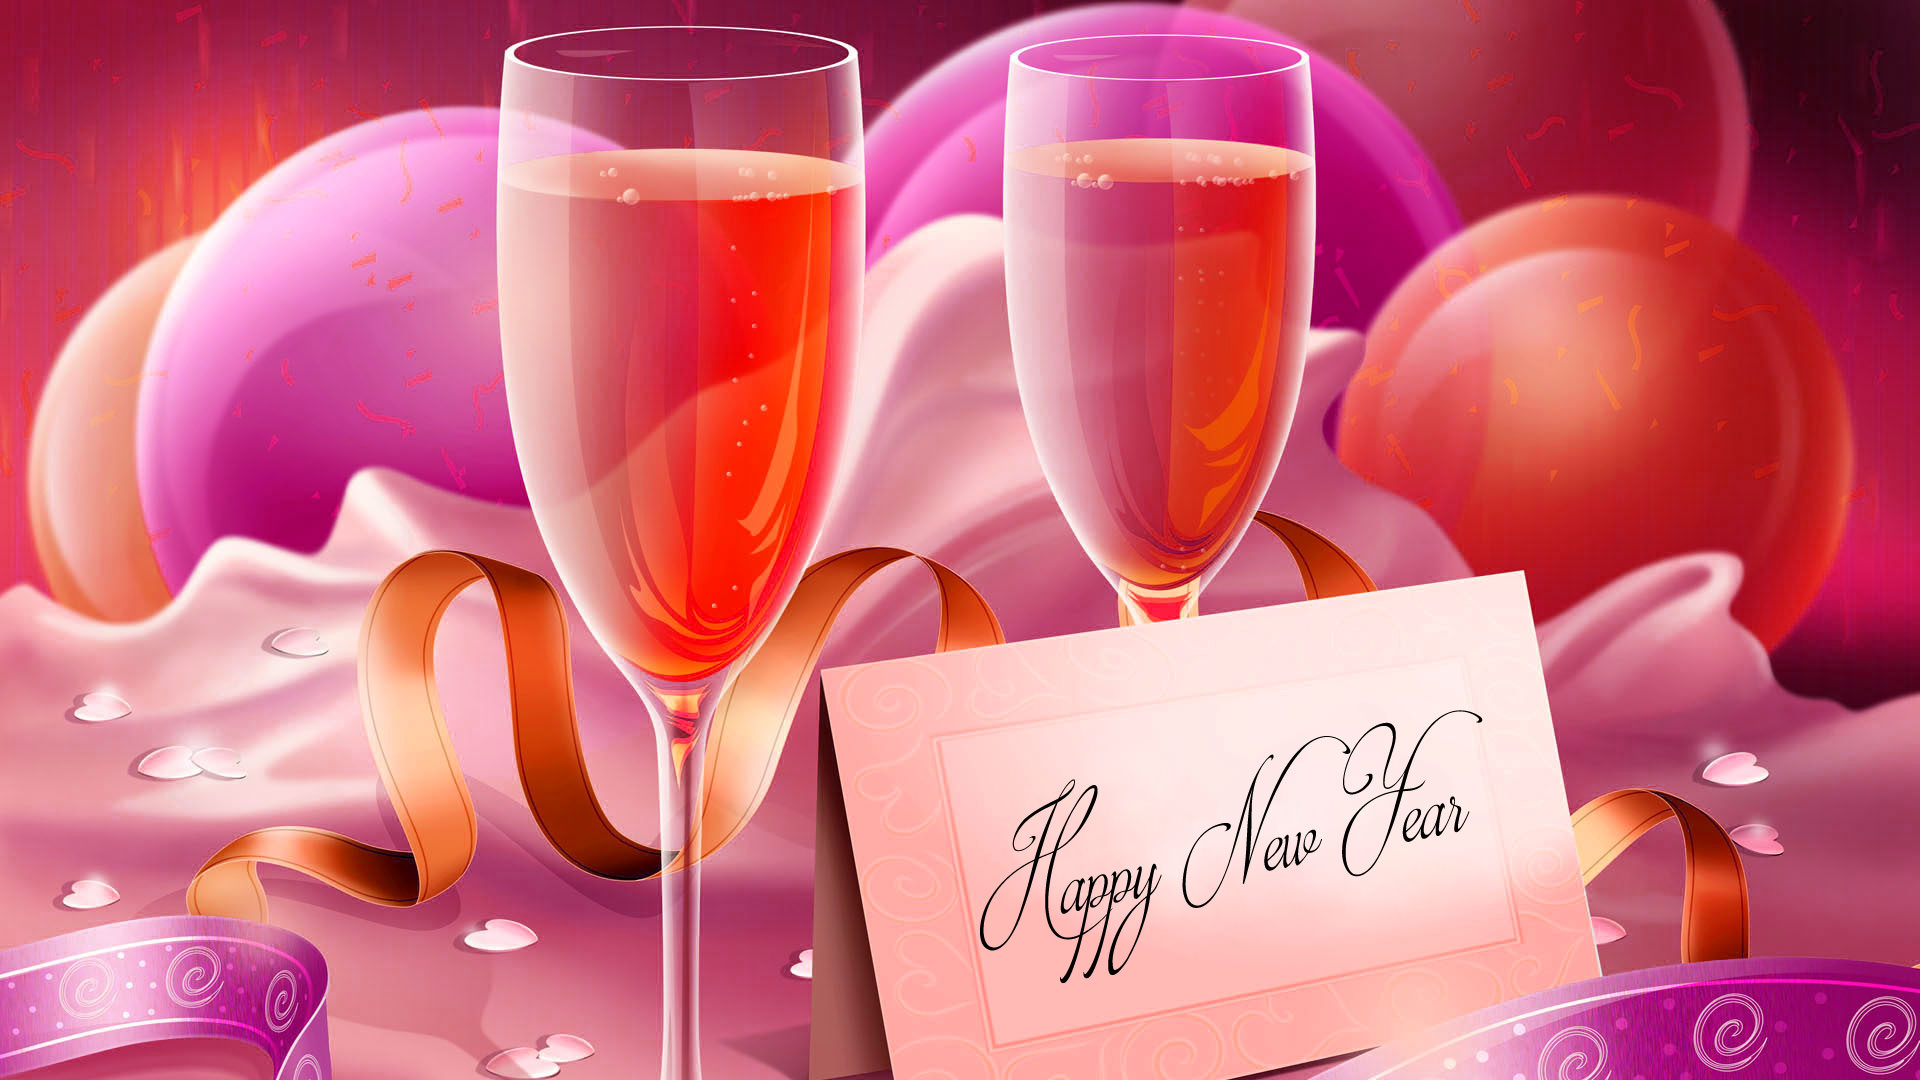 Happy New Year Wallpapers With Wine Glasses